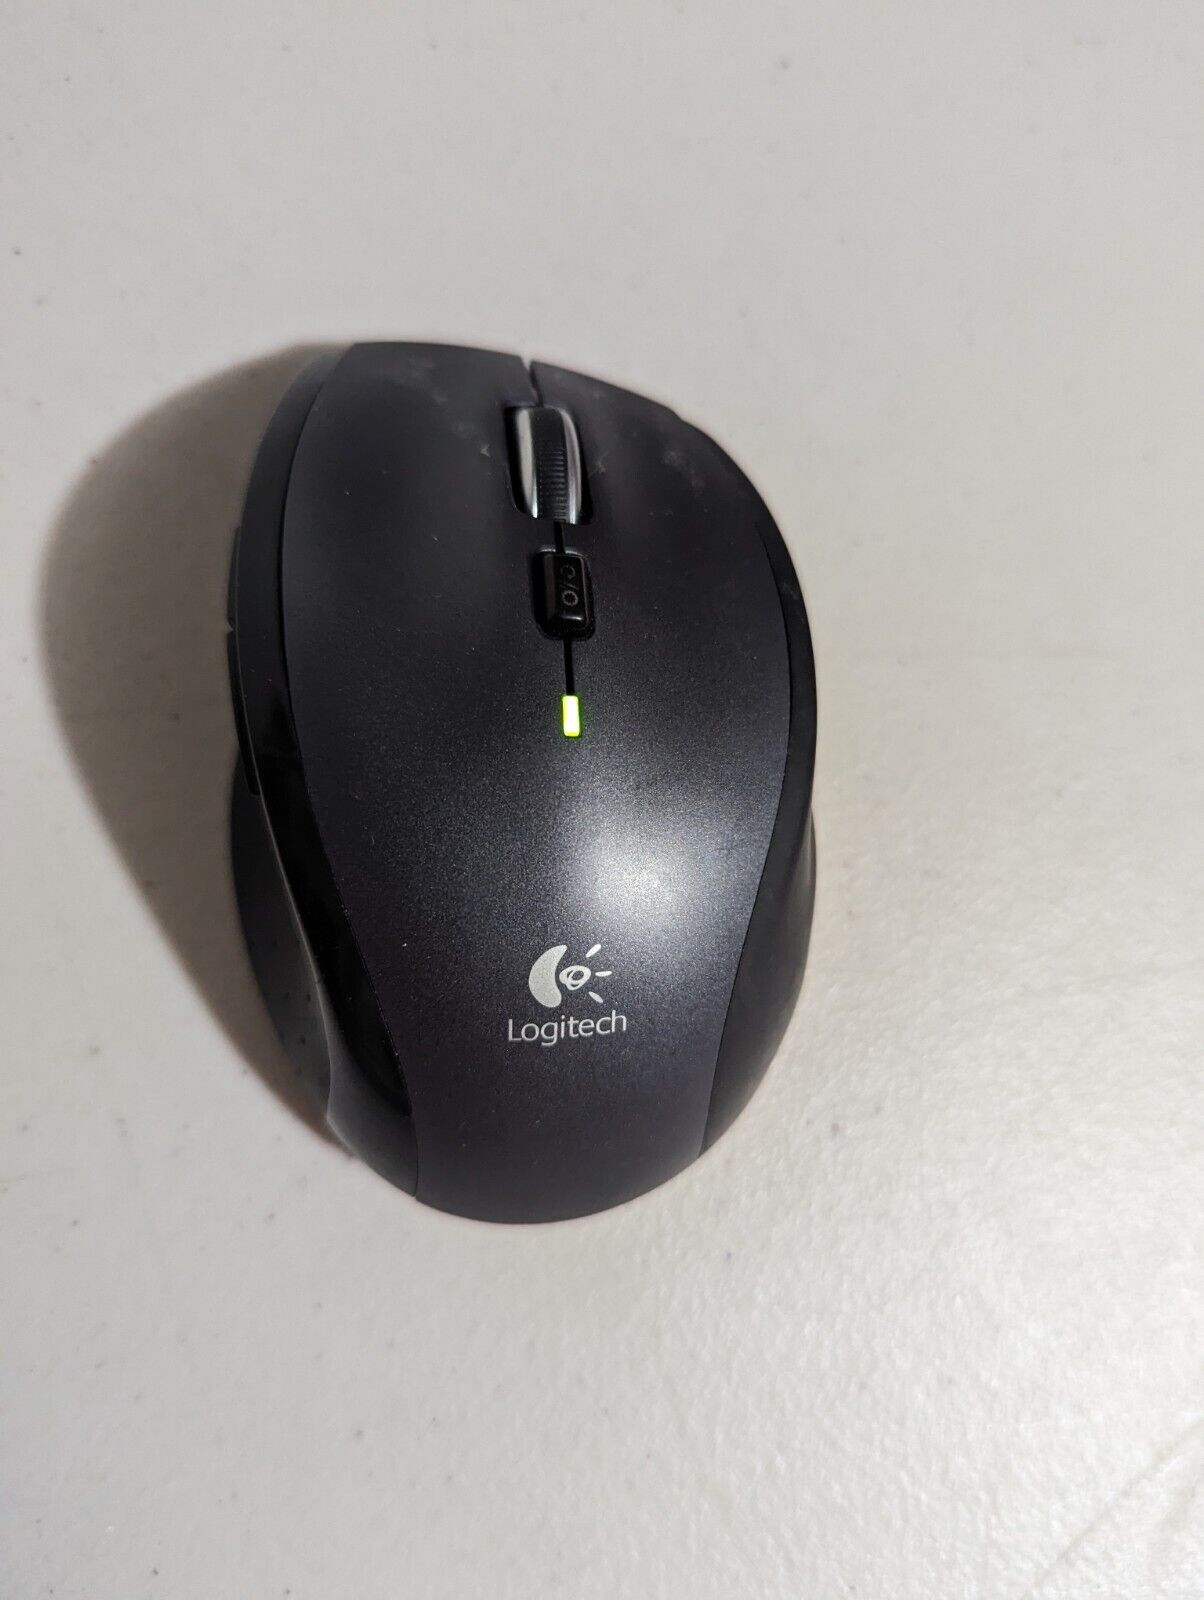 Logitech M705 Wireless Mouse with paired USB Unifying Receiver dongle Test Works